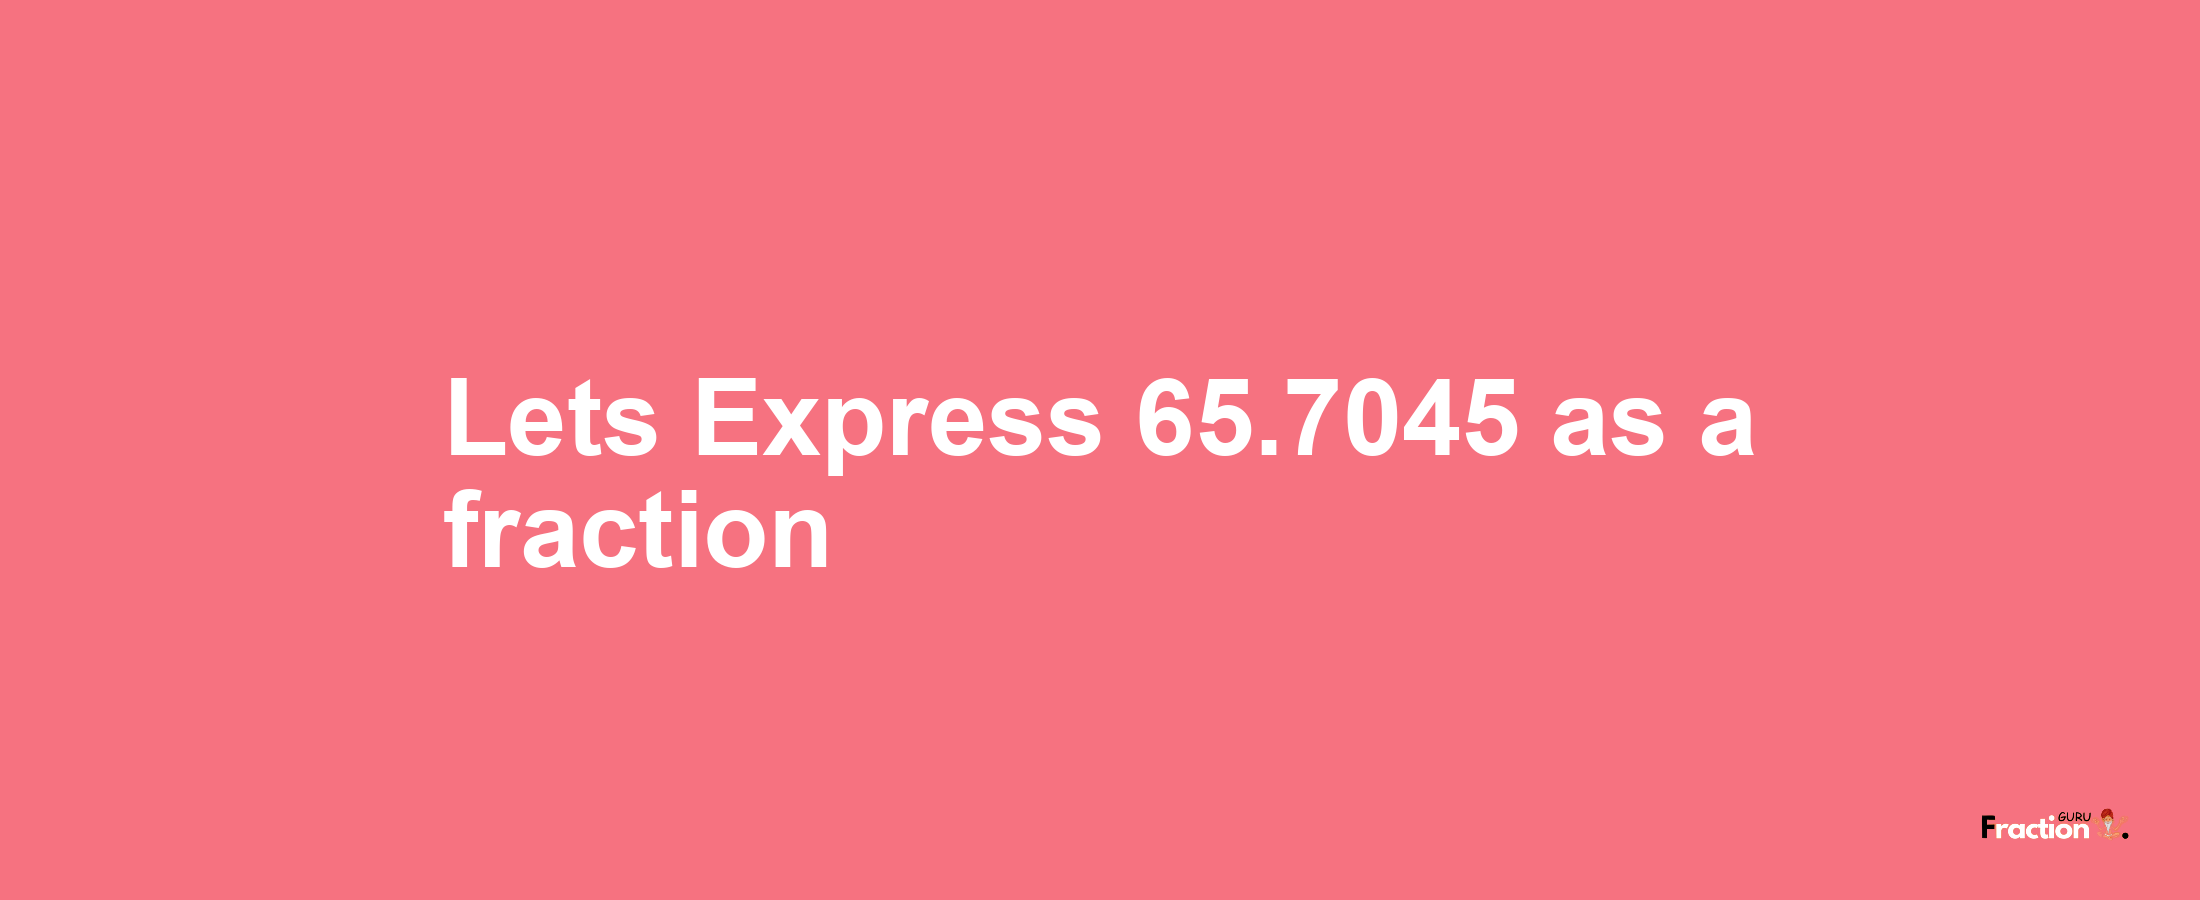 Lets Express 65.7045 as afraction